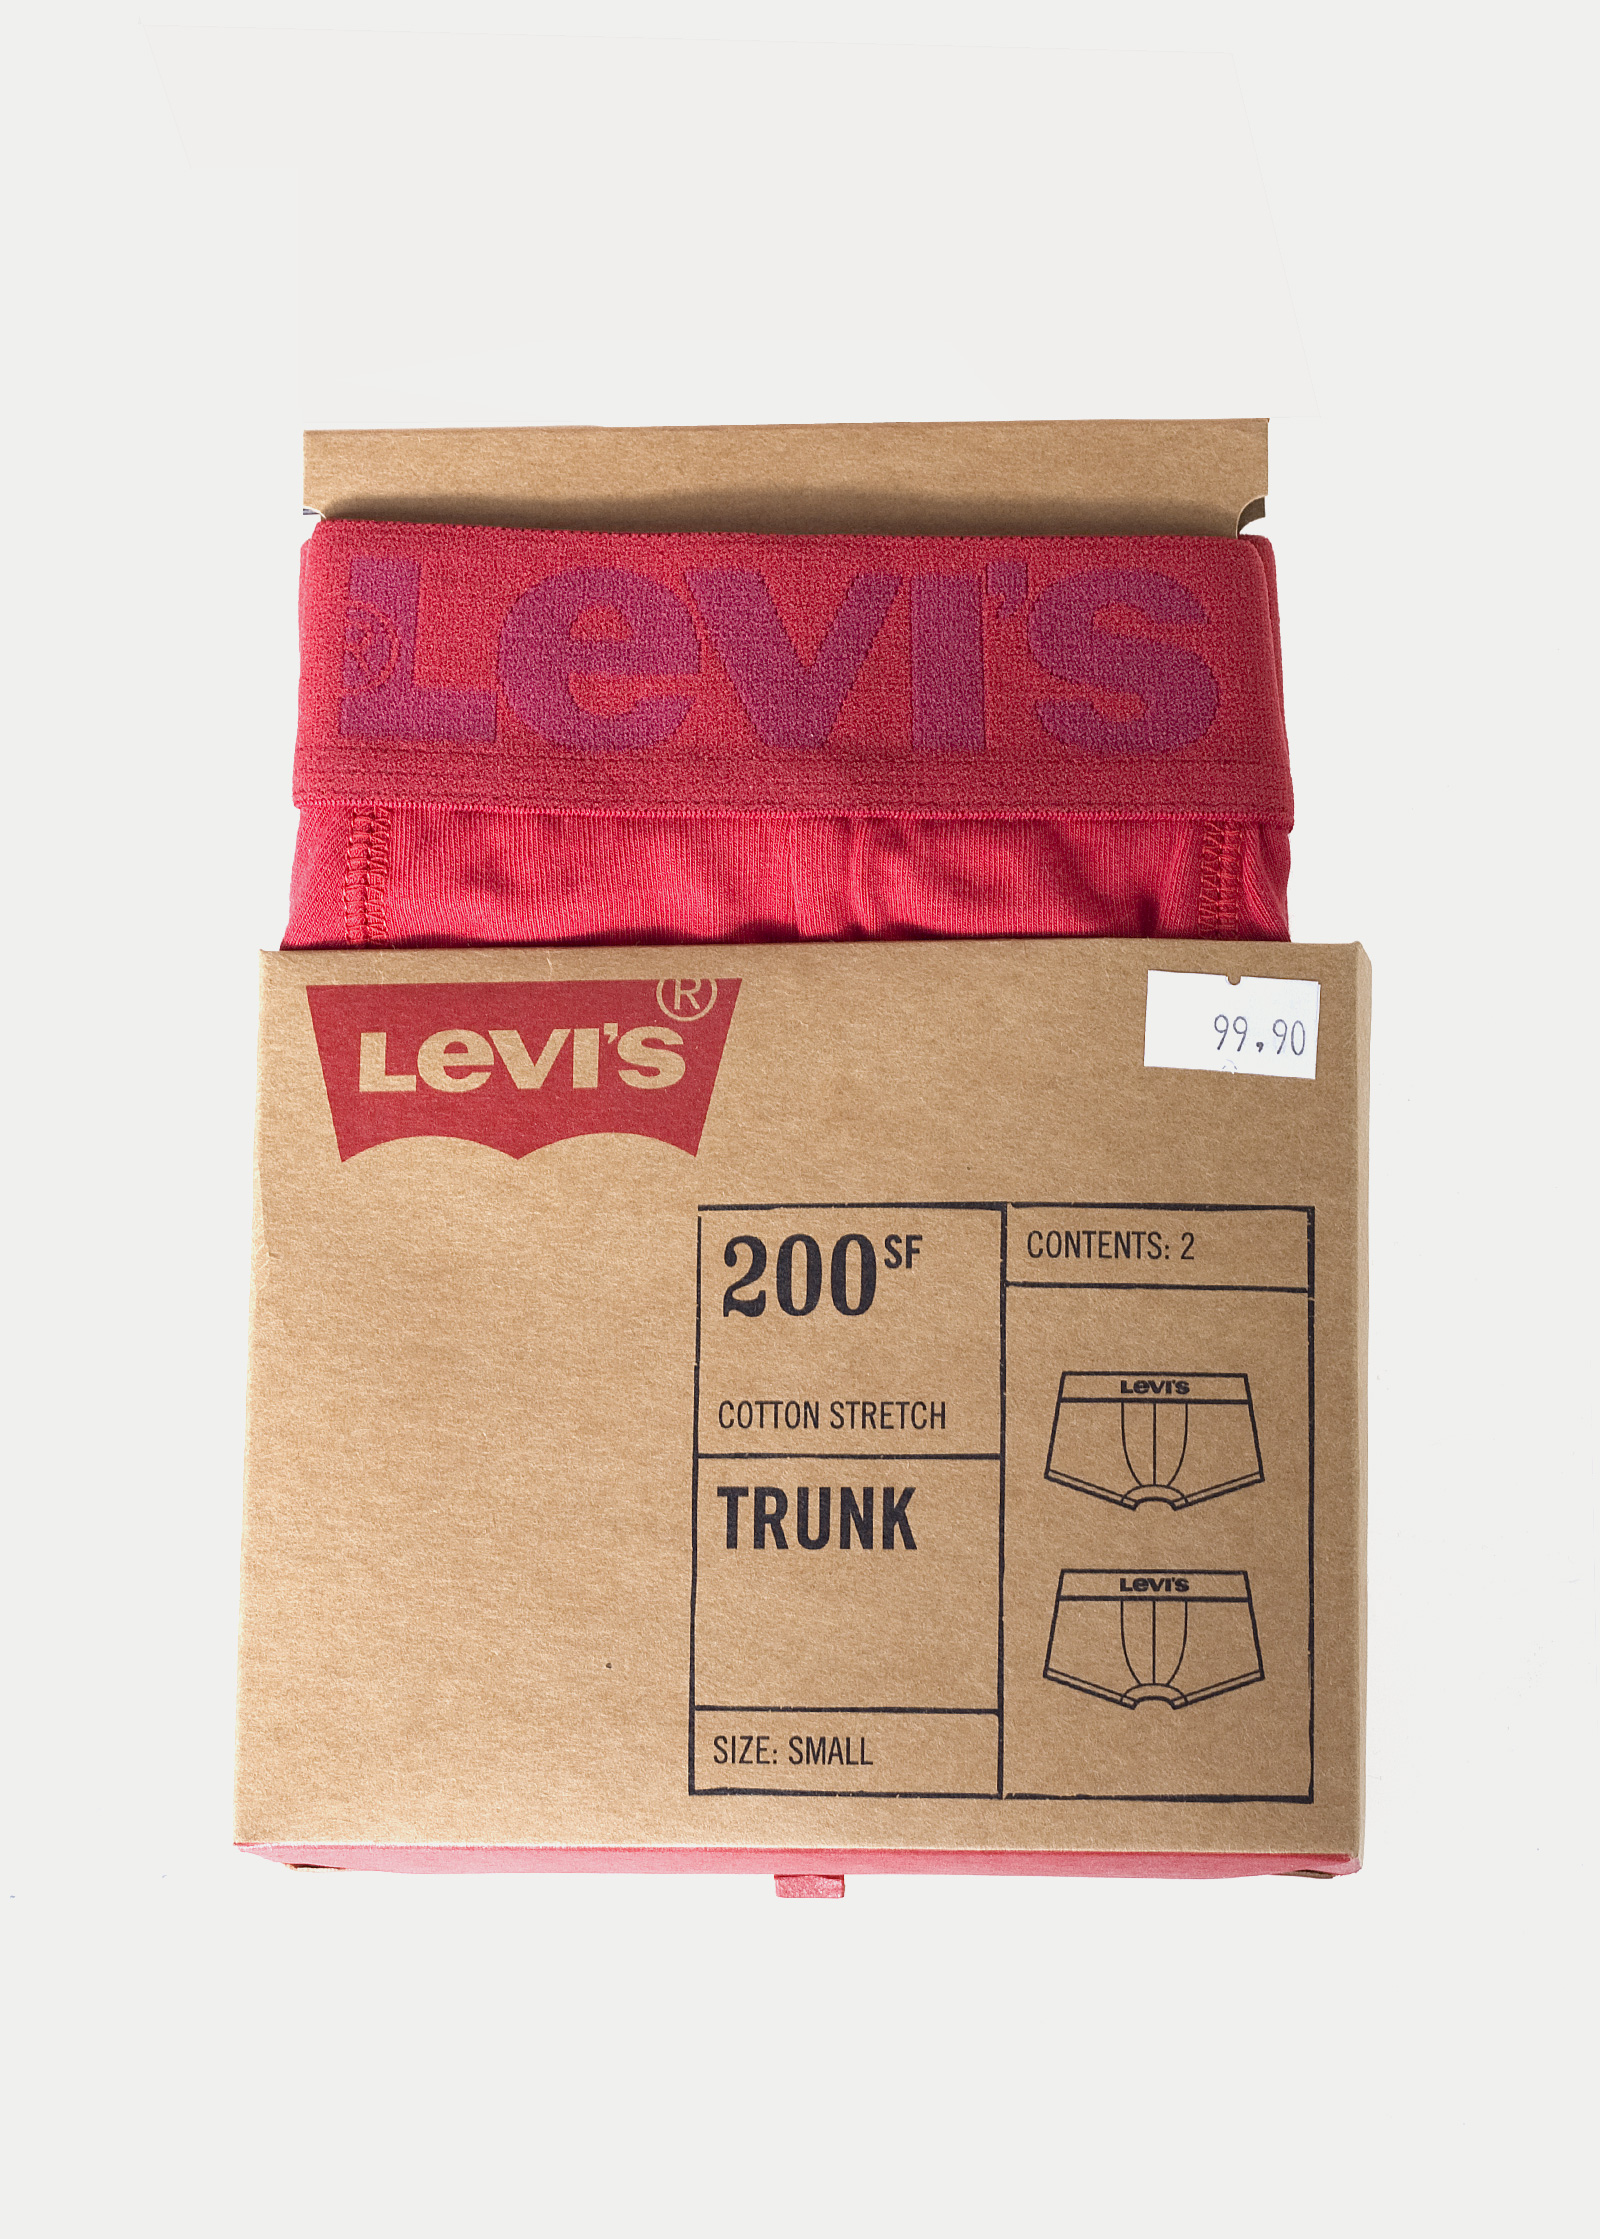 levis 200sf trunk